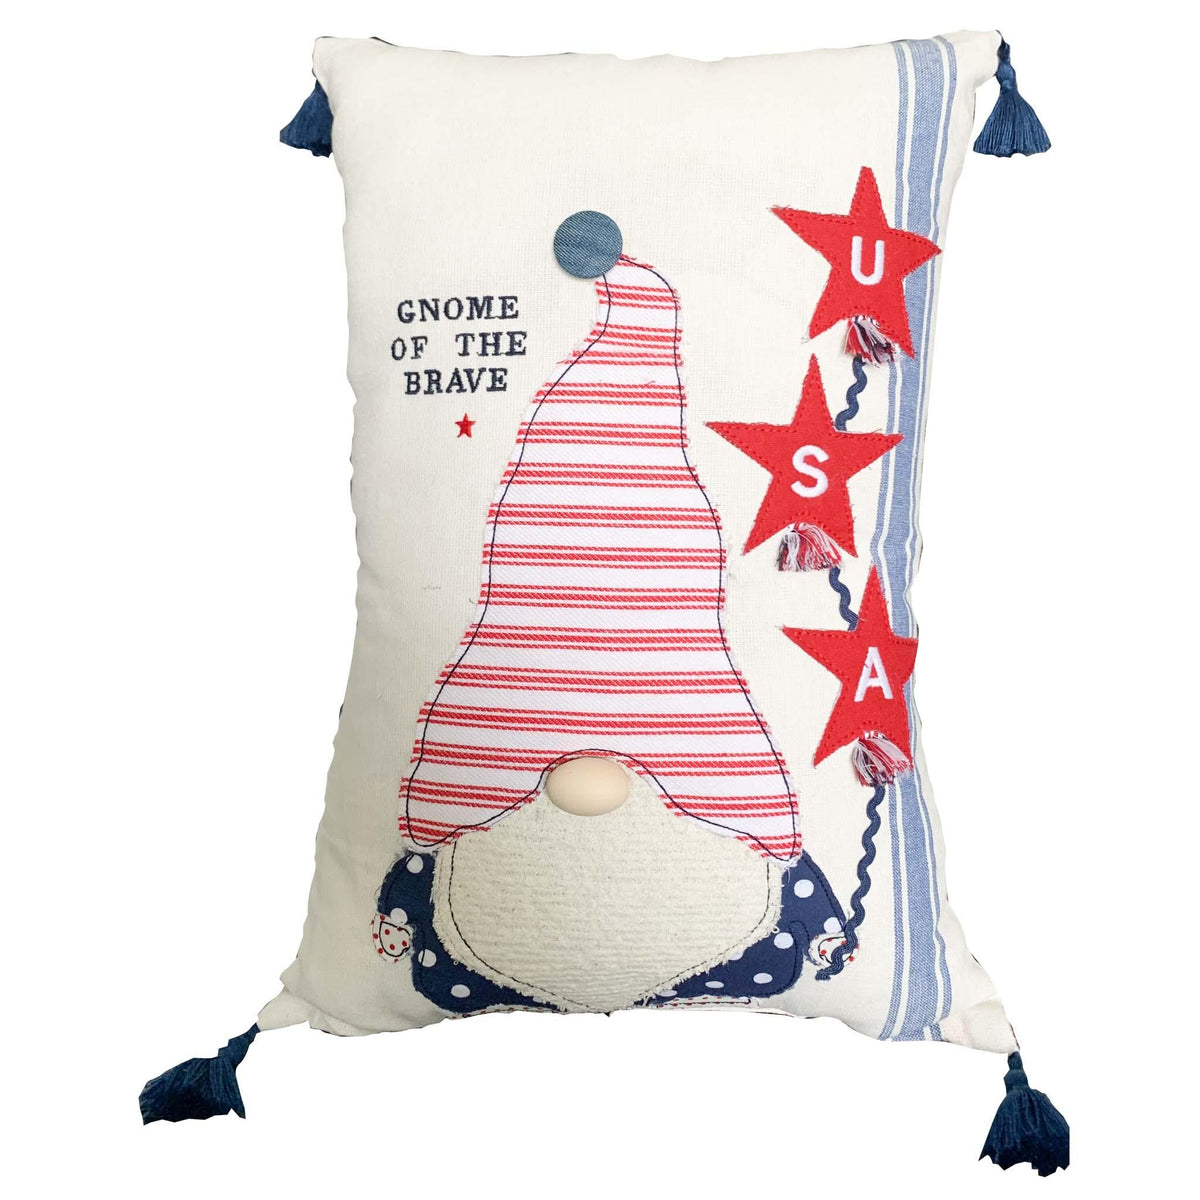 Gnome of the Brave Pillow - GLORY HAUS 